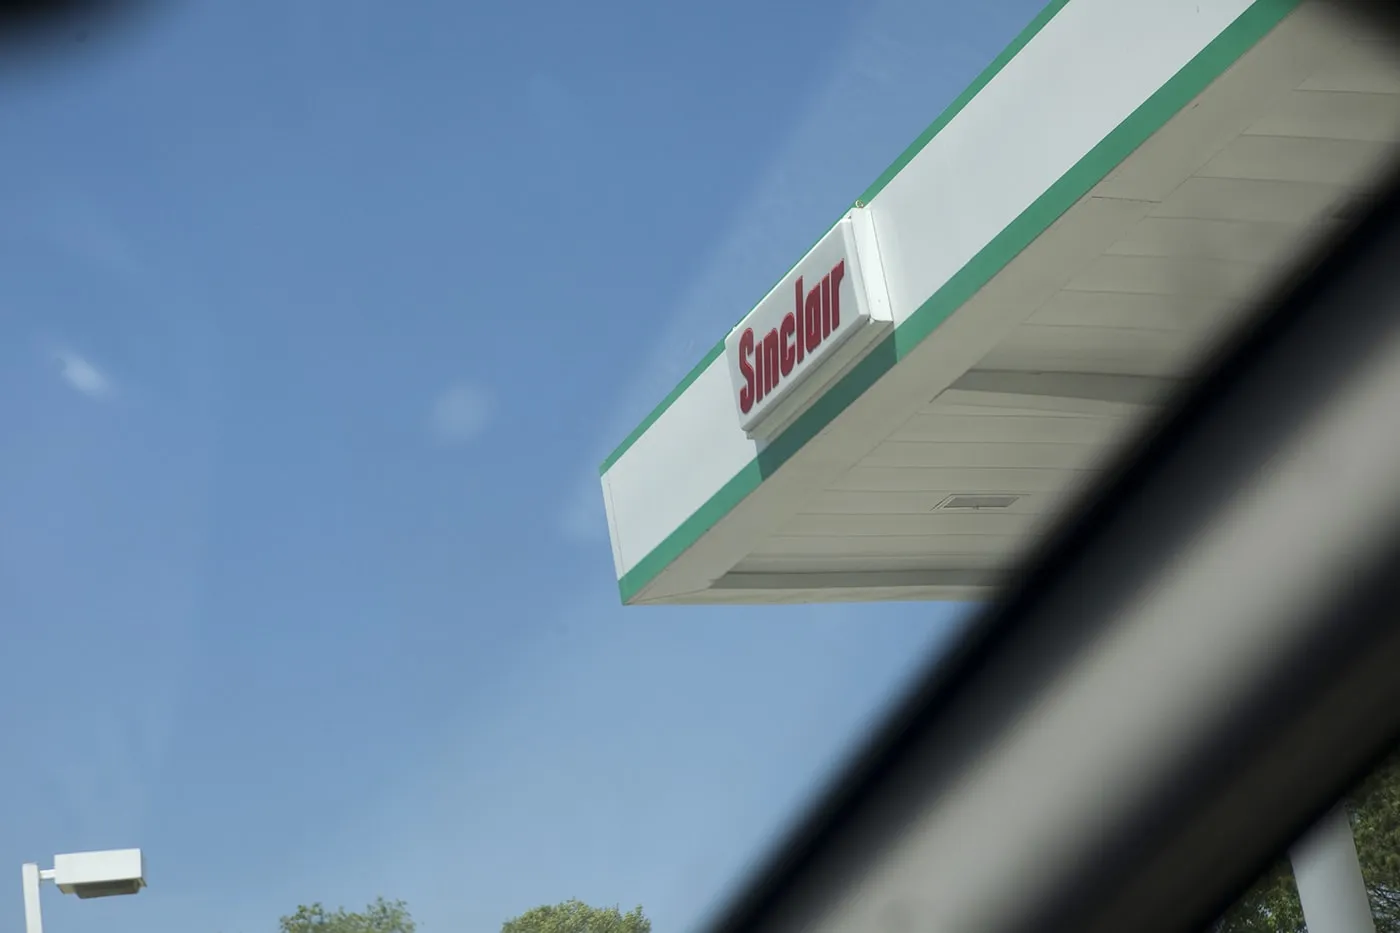 Closed Sinclair gas station in Missouri